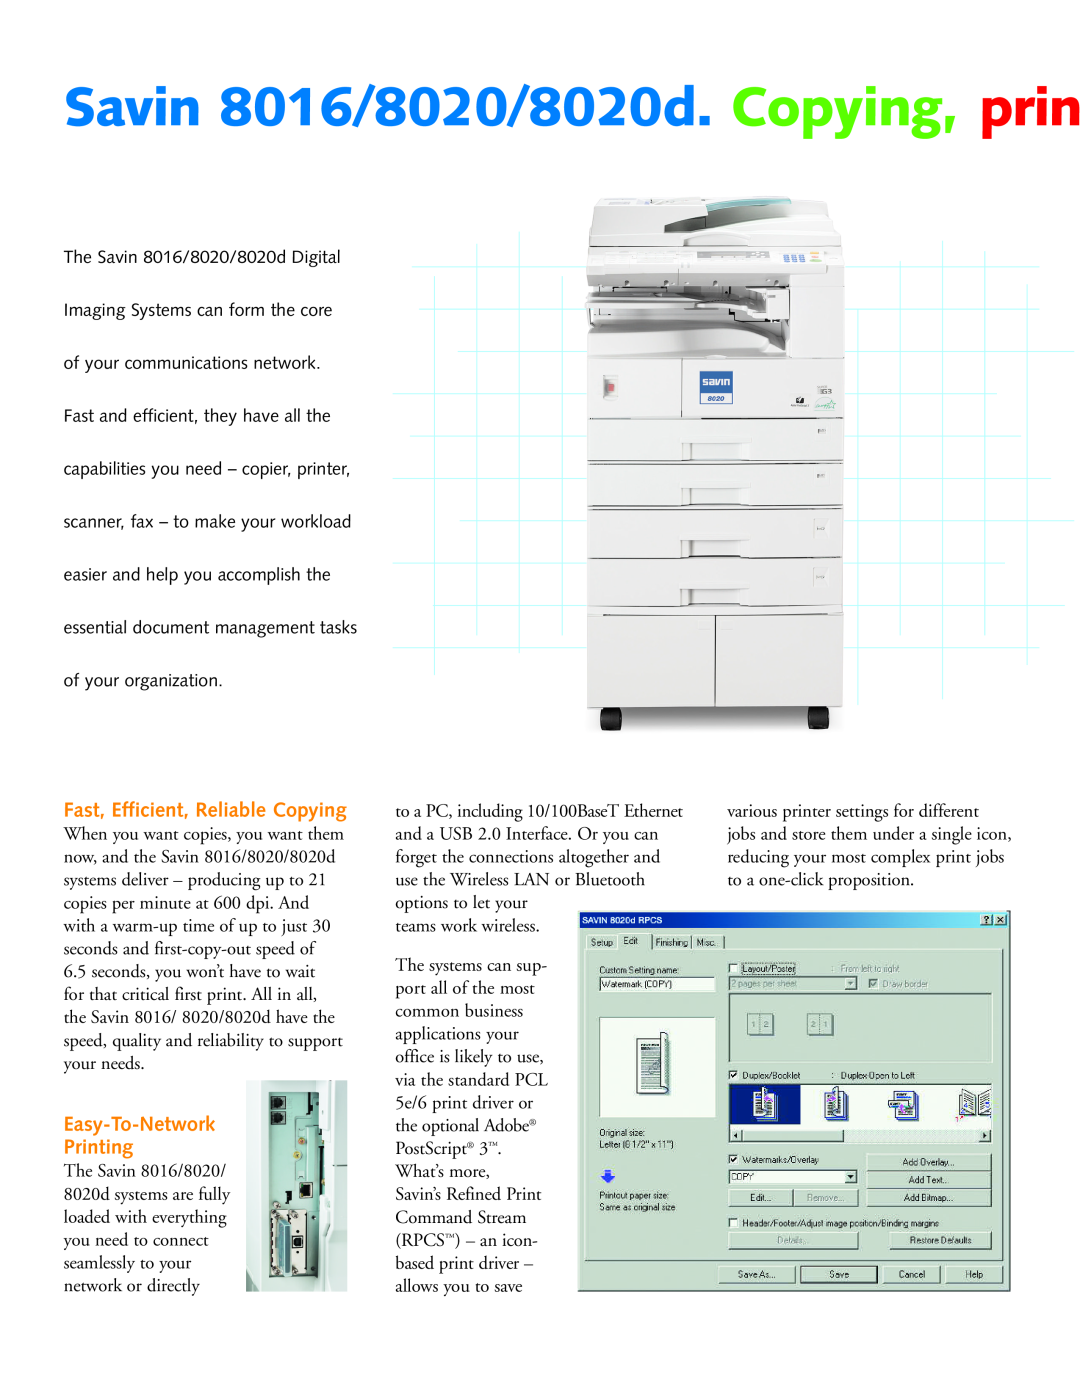 Savin manual Fast, Efficient, Reliable Copying, Easy-To-Network Printing, Savin 8016/8020/8020d. Copying, prin 